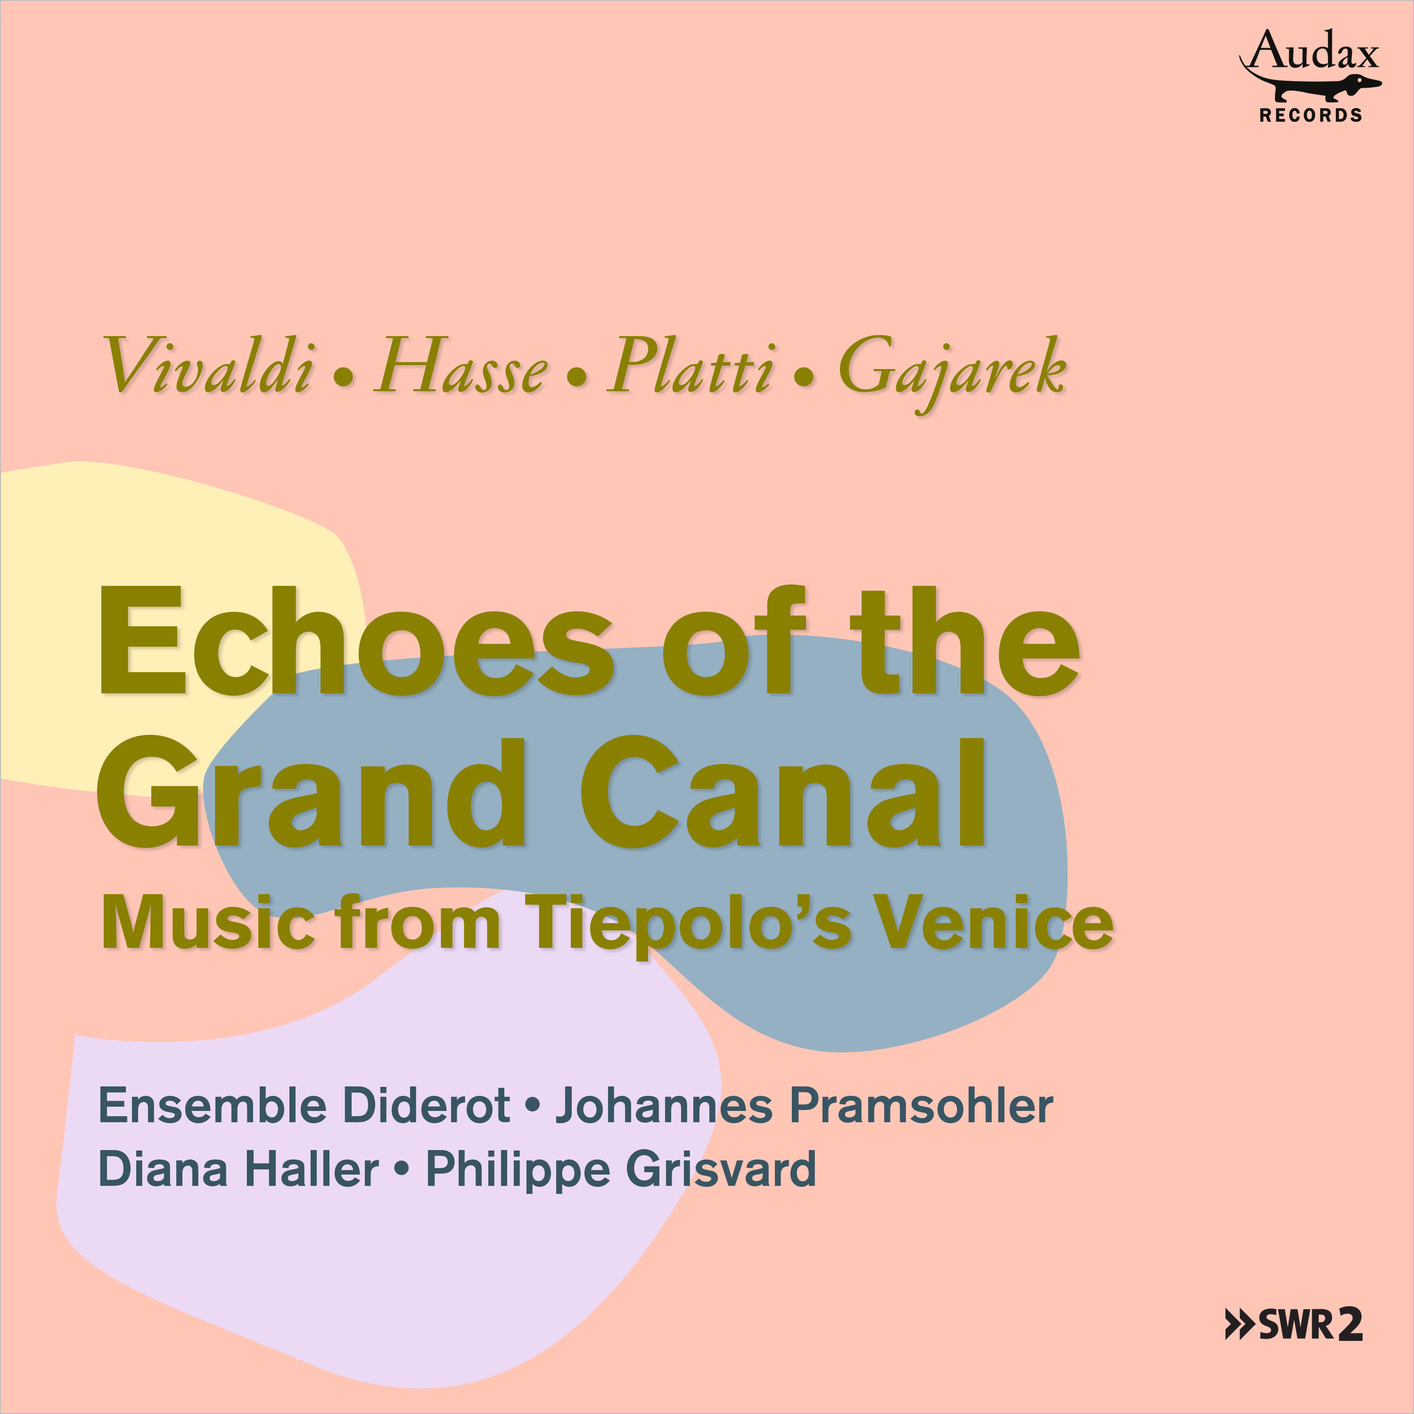 Ensemble Diderot & Johannes Pramsohler – Echoes of the Grand Canal (2019) [FLAC 24bit/48kHz]